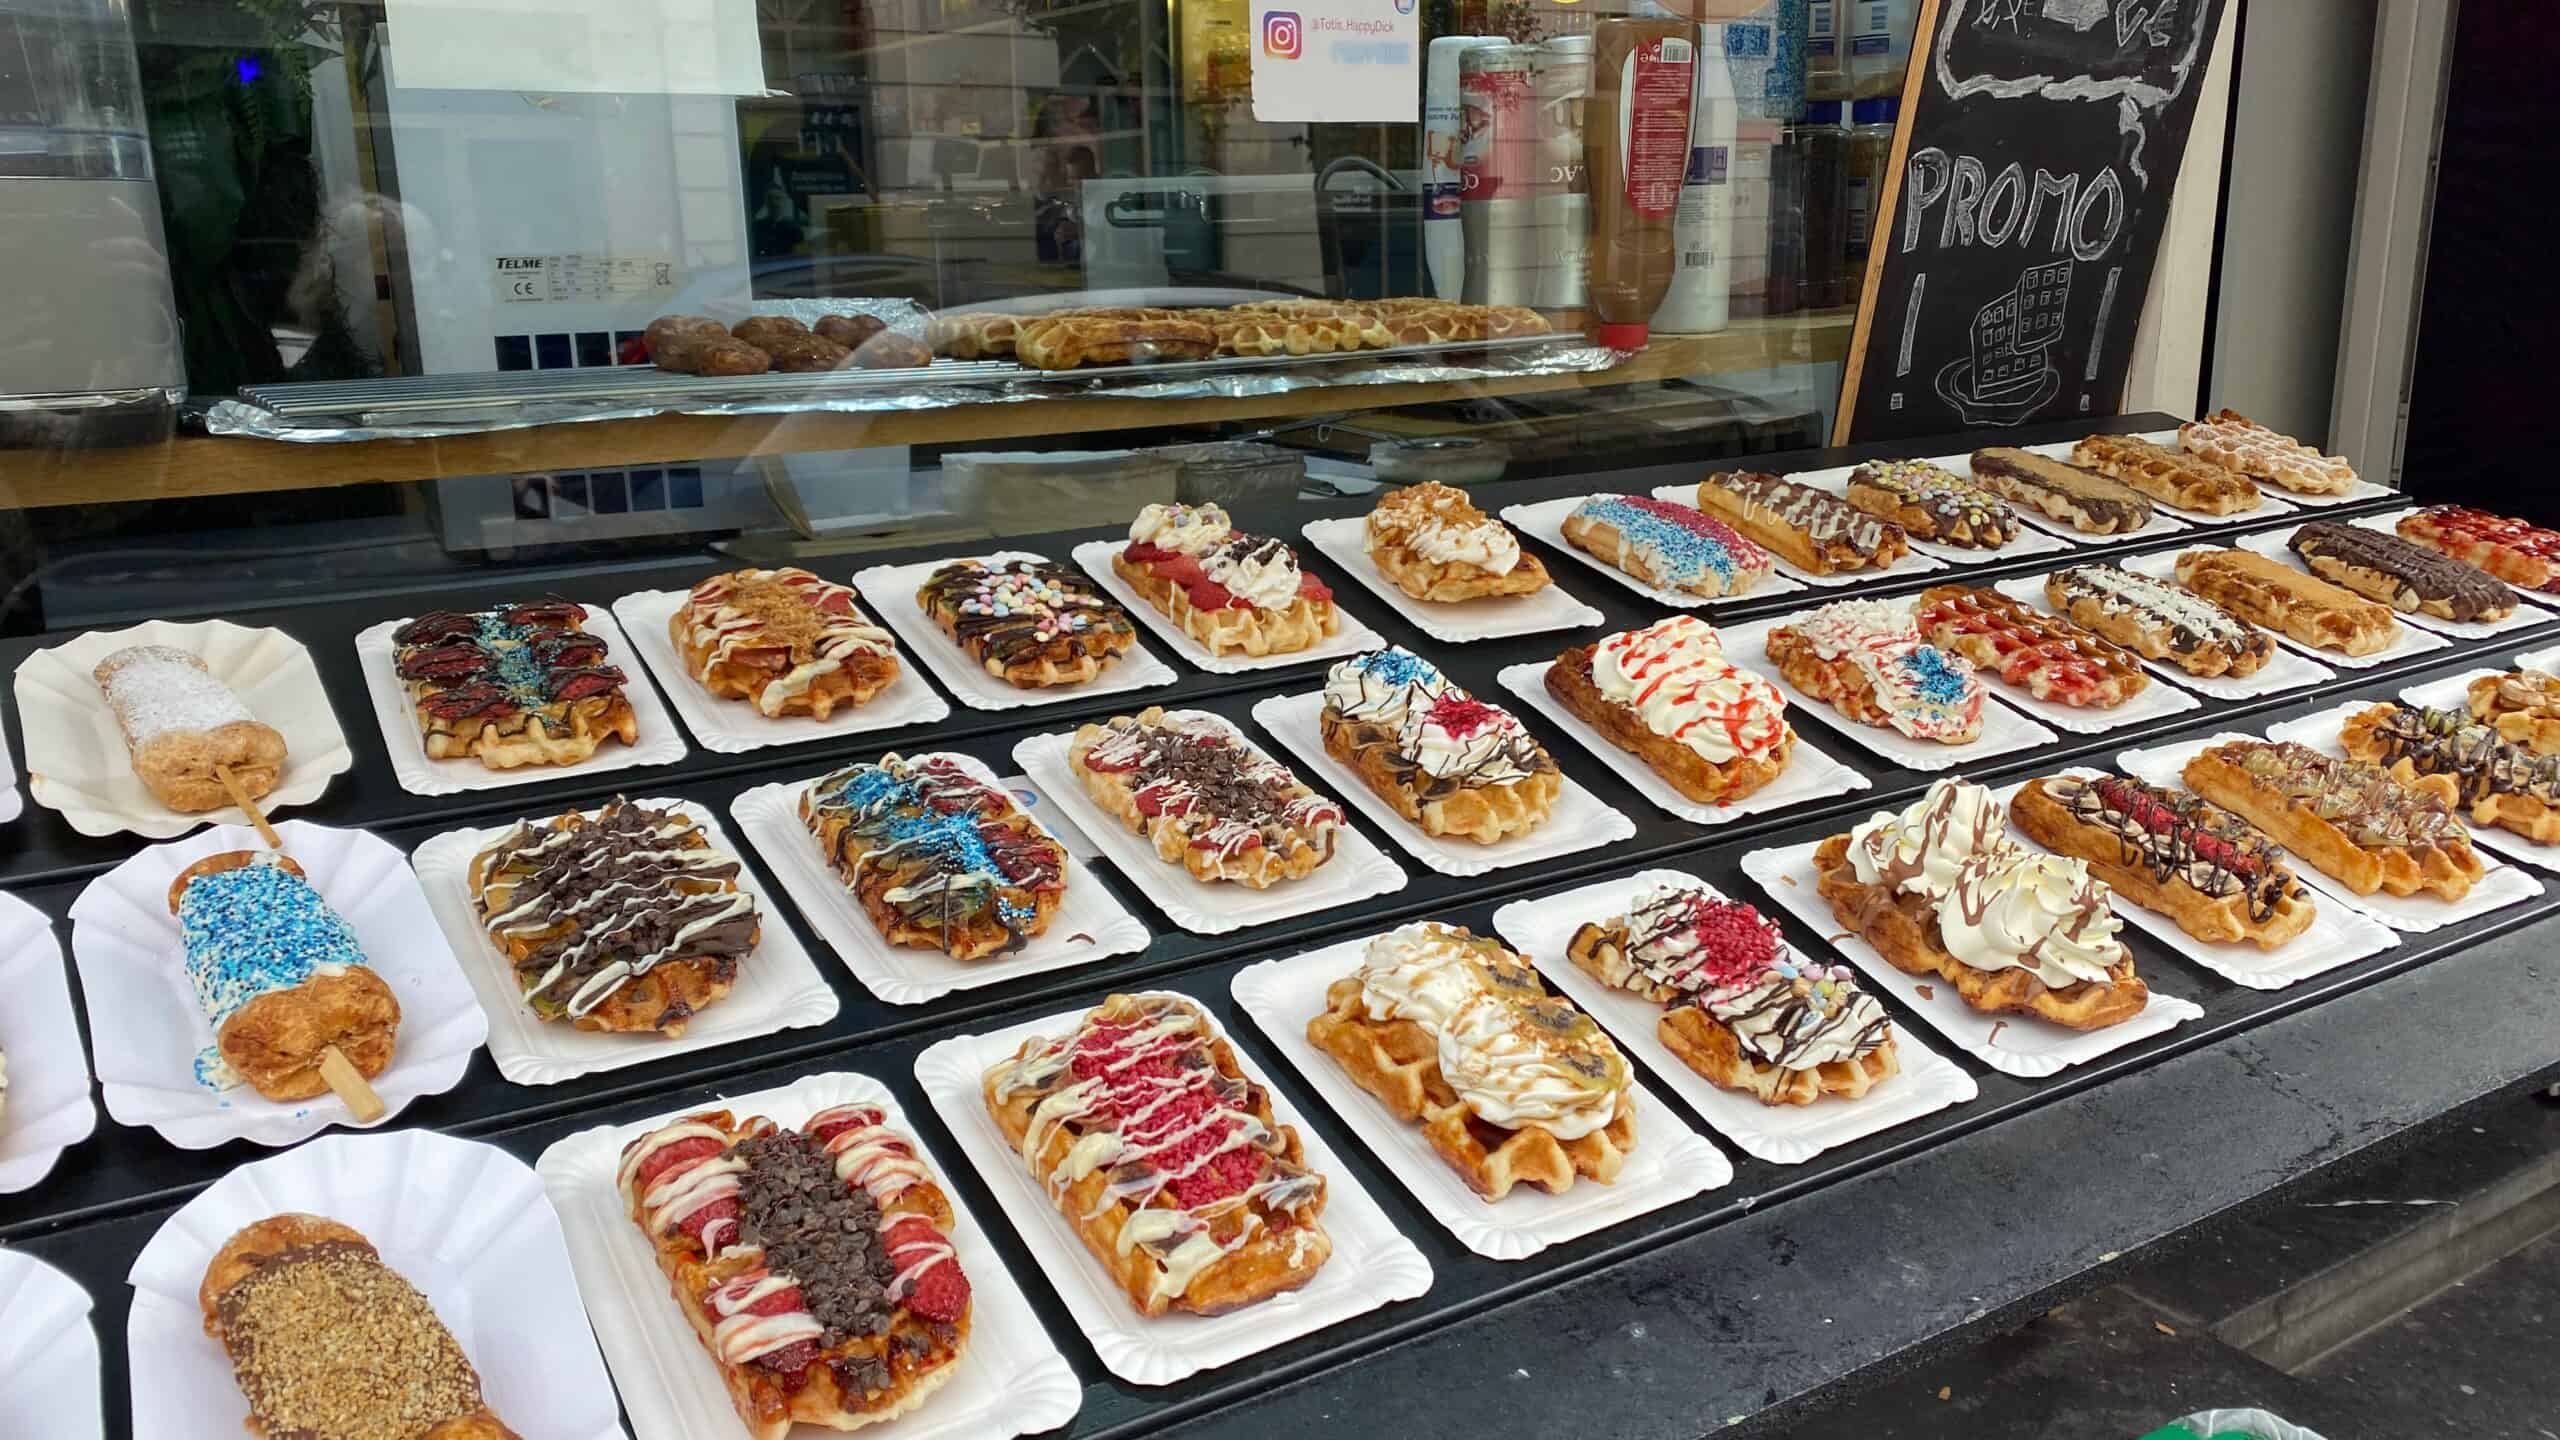 The most incredible waffles decorated in various ways. So tasty.